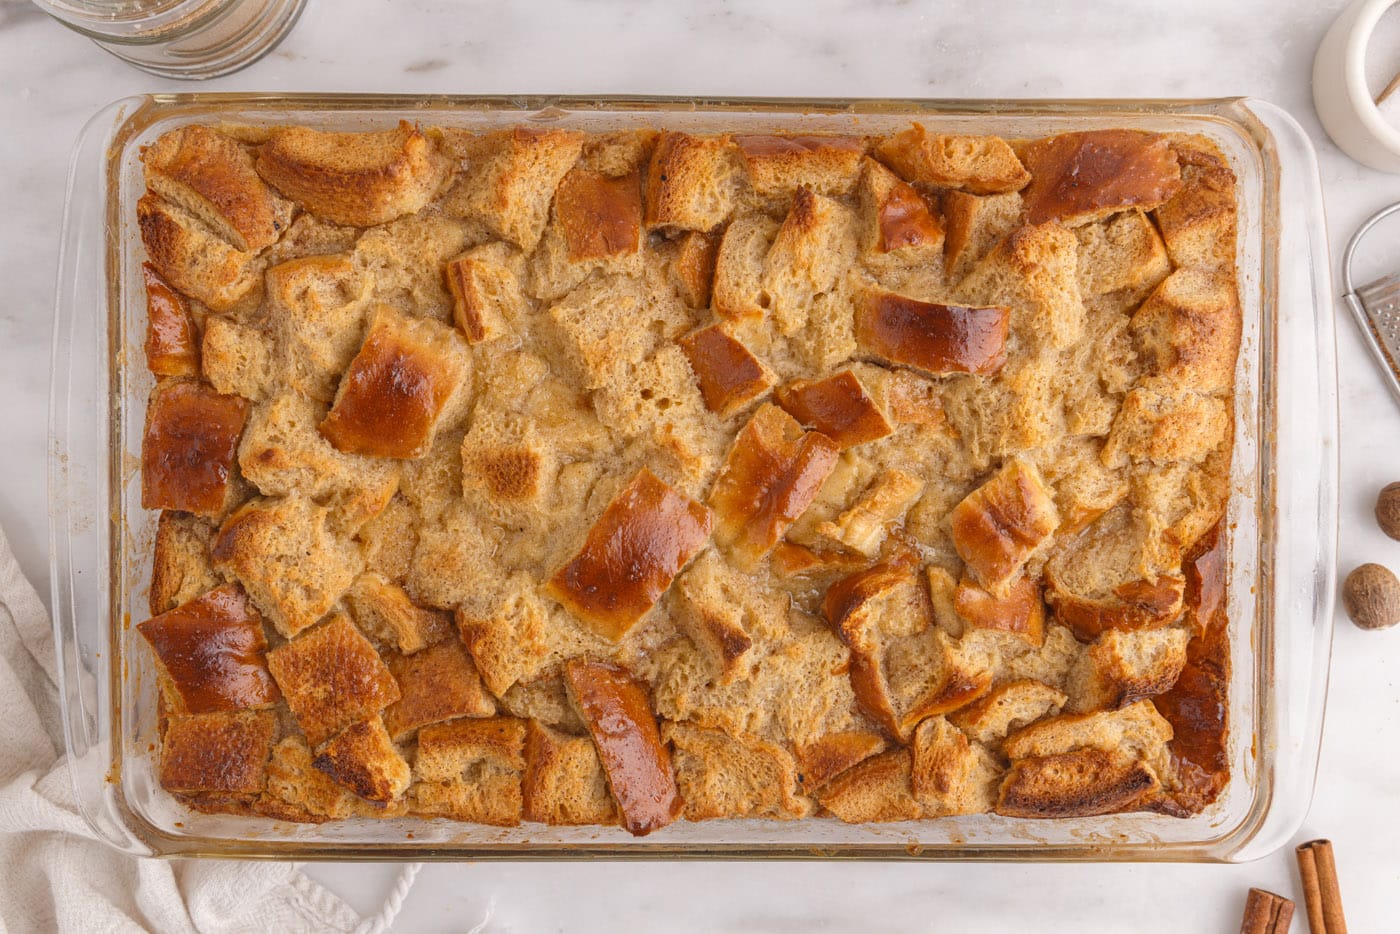 baked bread pudding in a casserole dish